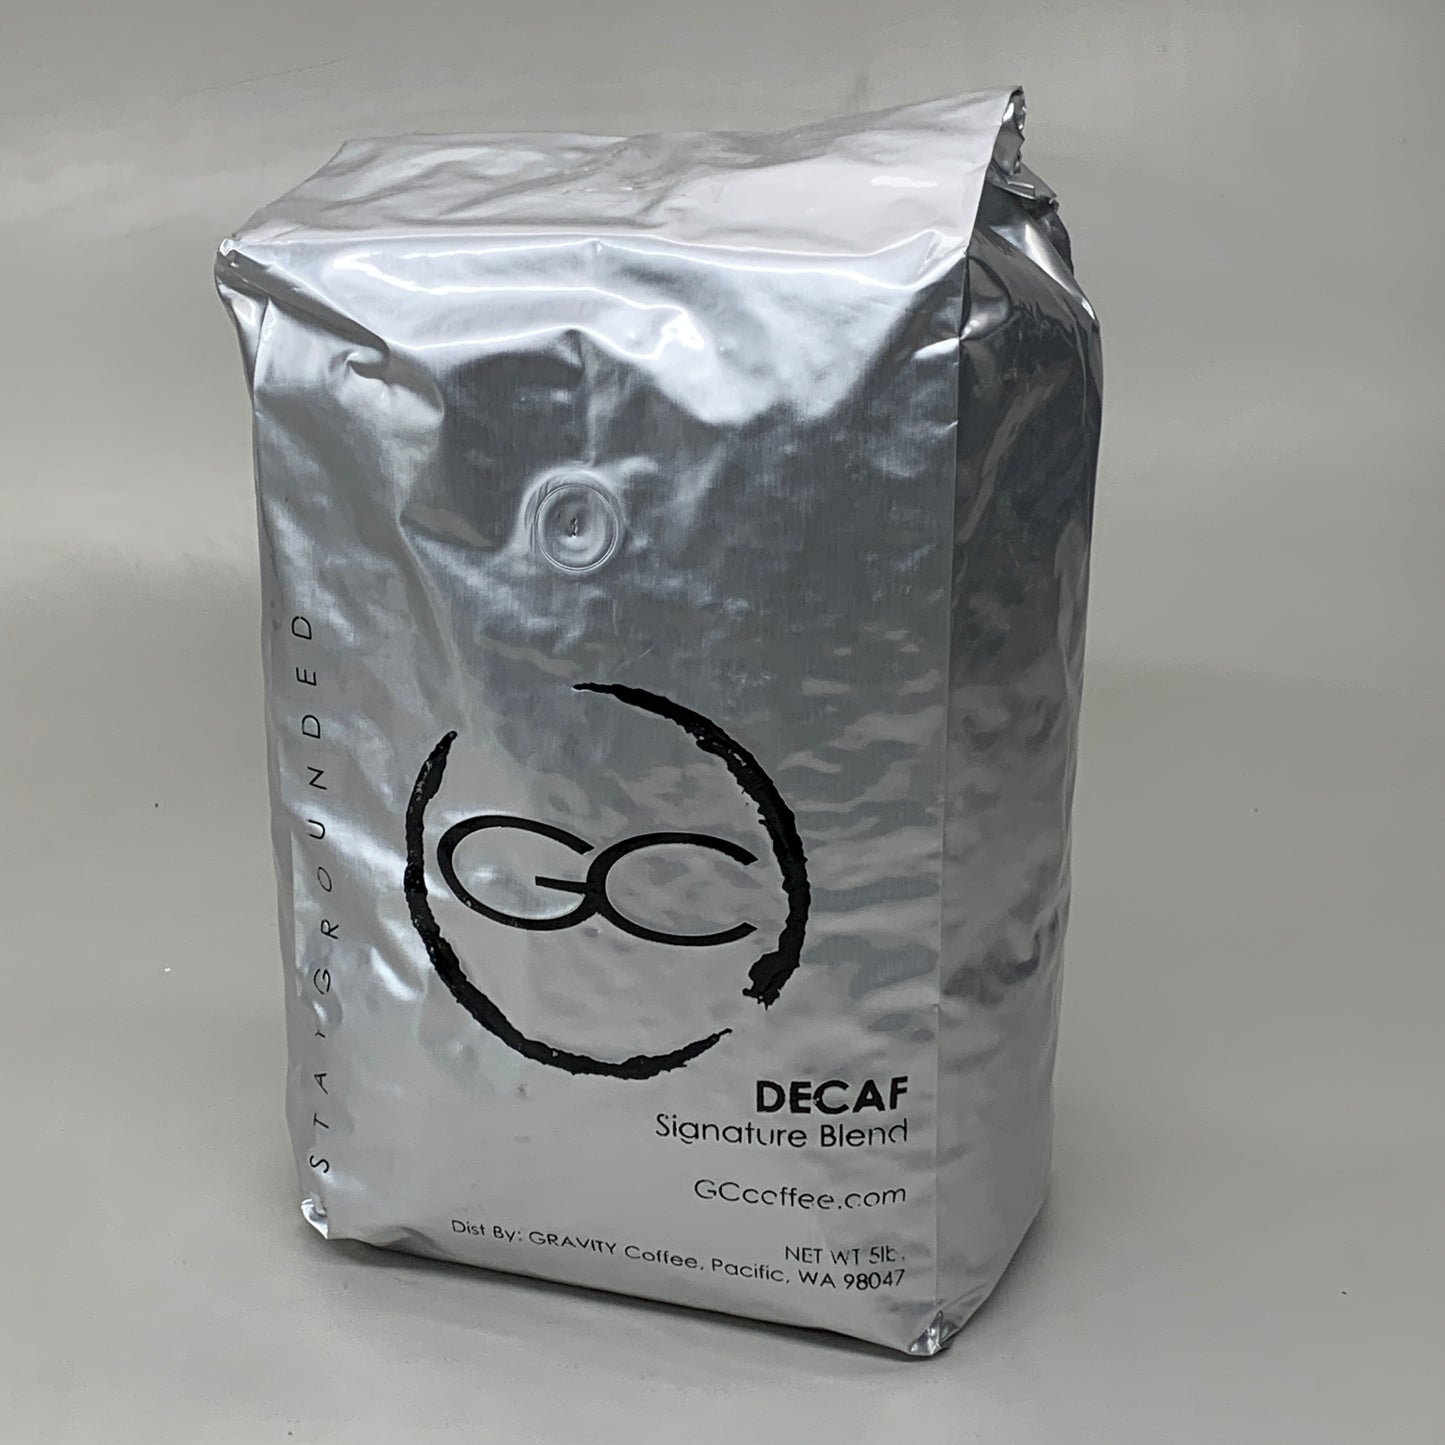 GC COFFEE CO. (2 BAGS) Gravity Coffee Decaf Signature Blend 5lb Bag